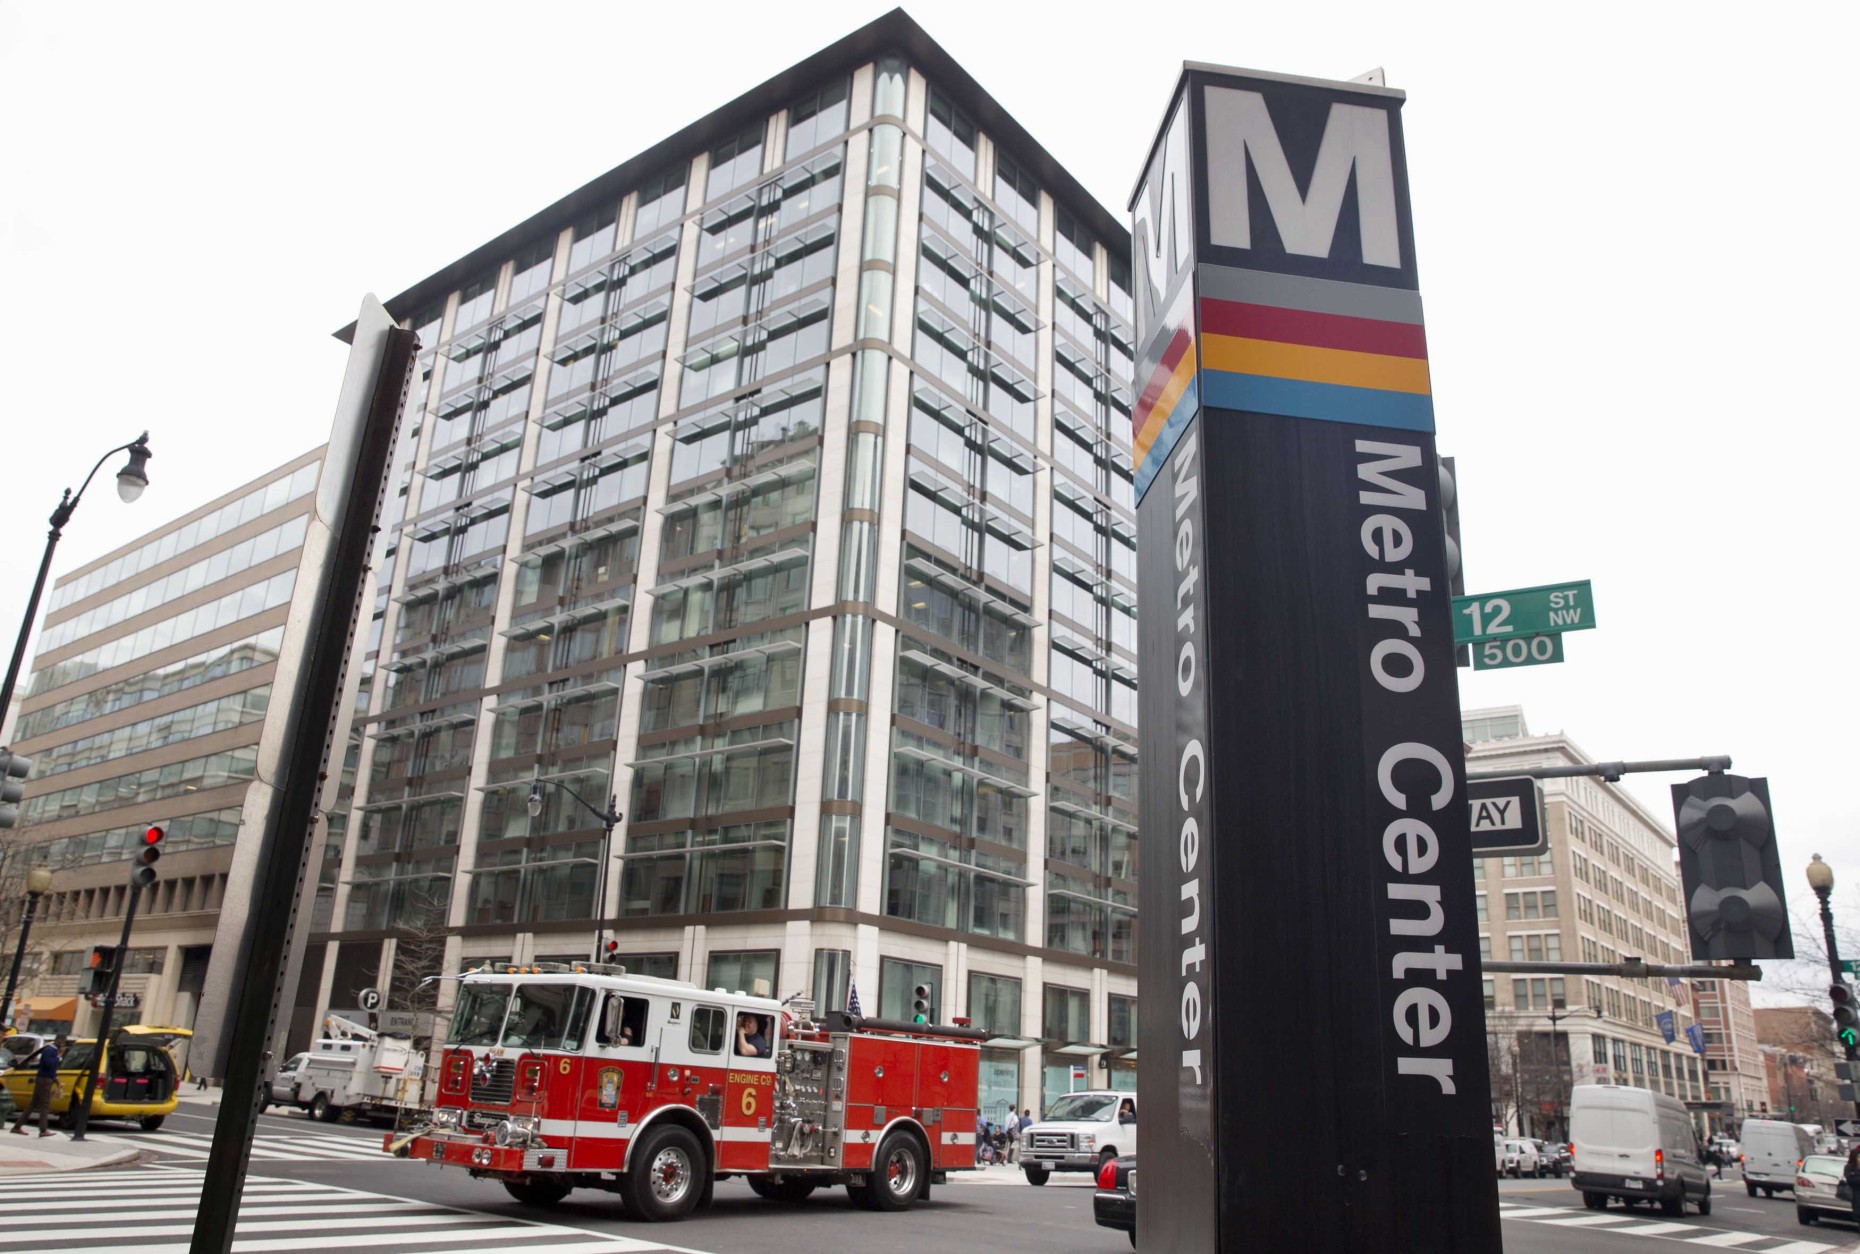 A firetruck passes the Metro Center metro stop in downtown Washington, Tuesday, April 7, 2015, as power begins to return to the area after a brief outage. Widespread power outages affected the White House, State Department, Capitol and other sites across Washington and its suburbs Tuesday afternoon — all because of an explosion at a power plant in southern Maryland, an official said. (AP Photo/Jacquelyn Martin)